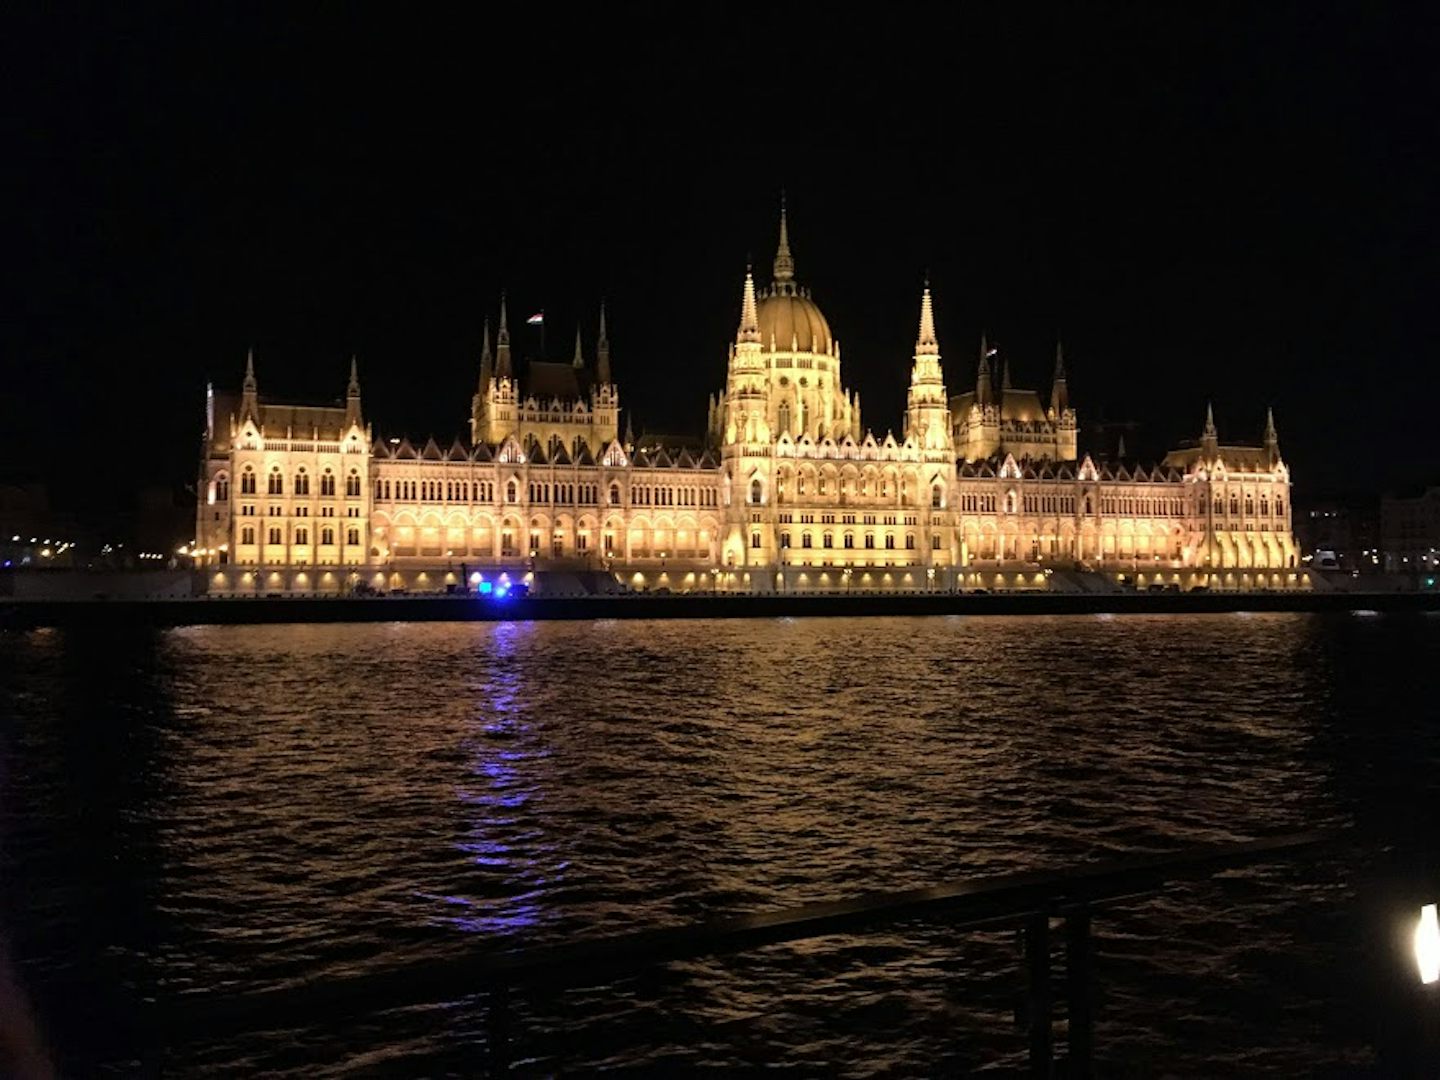 Parliament Building lit up along the Danube, entering Budapest Hungary. Thi